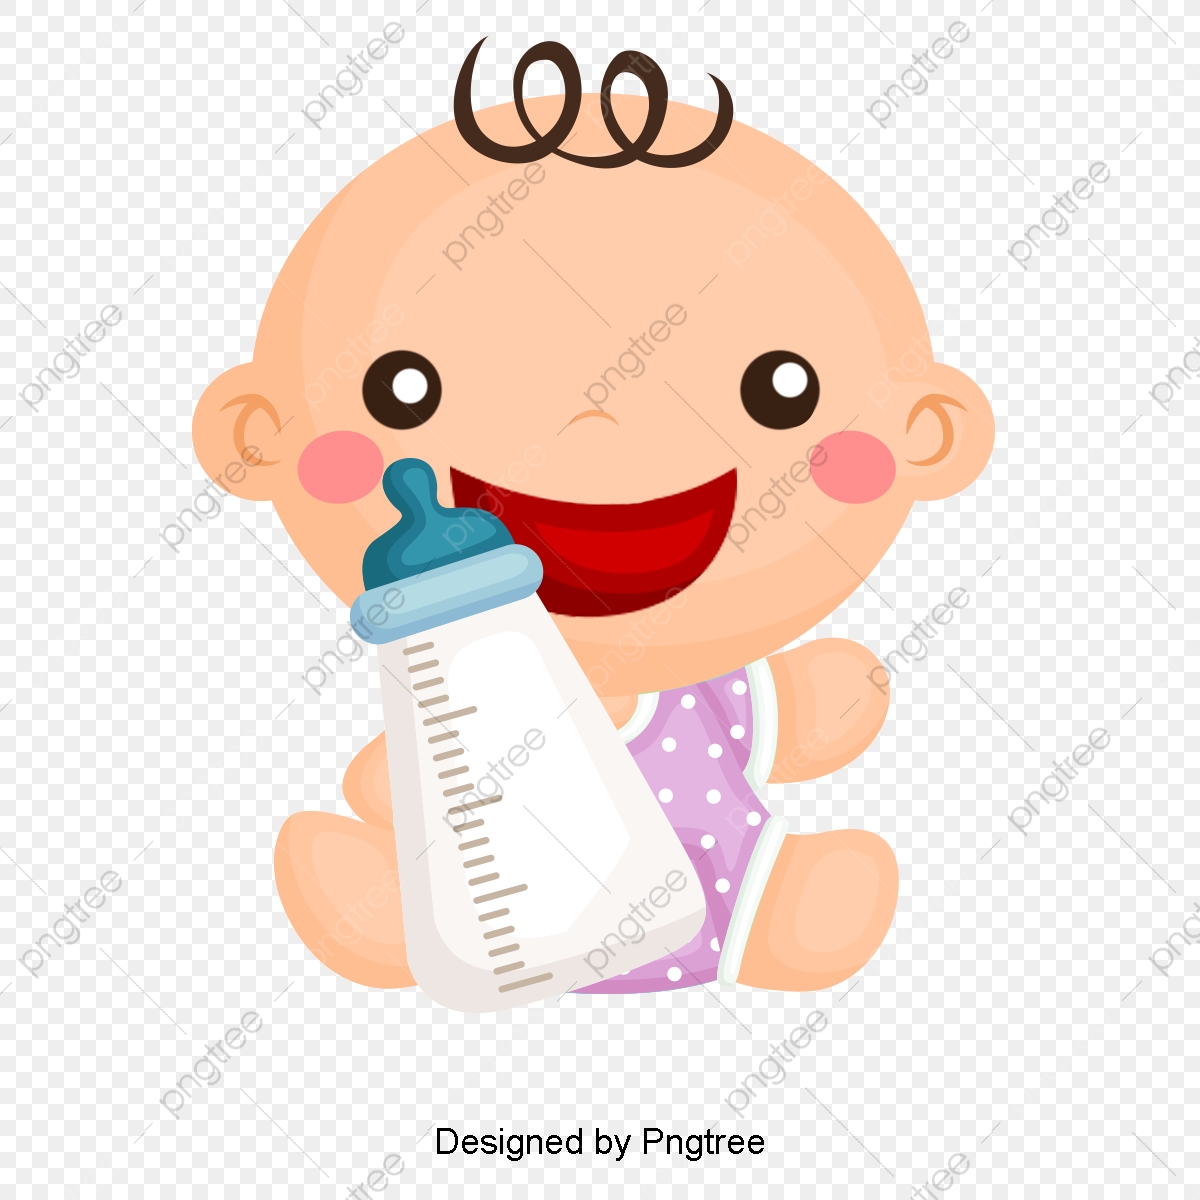 Cute Baby Girl, Baby, Clipart, Cute PNG Transparent Clipart Image.